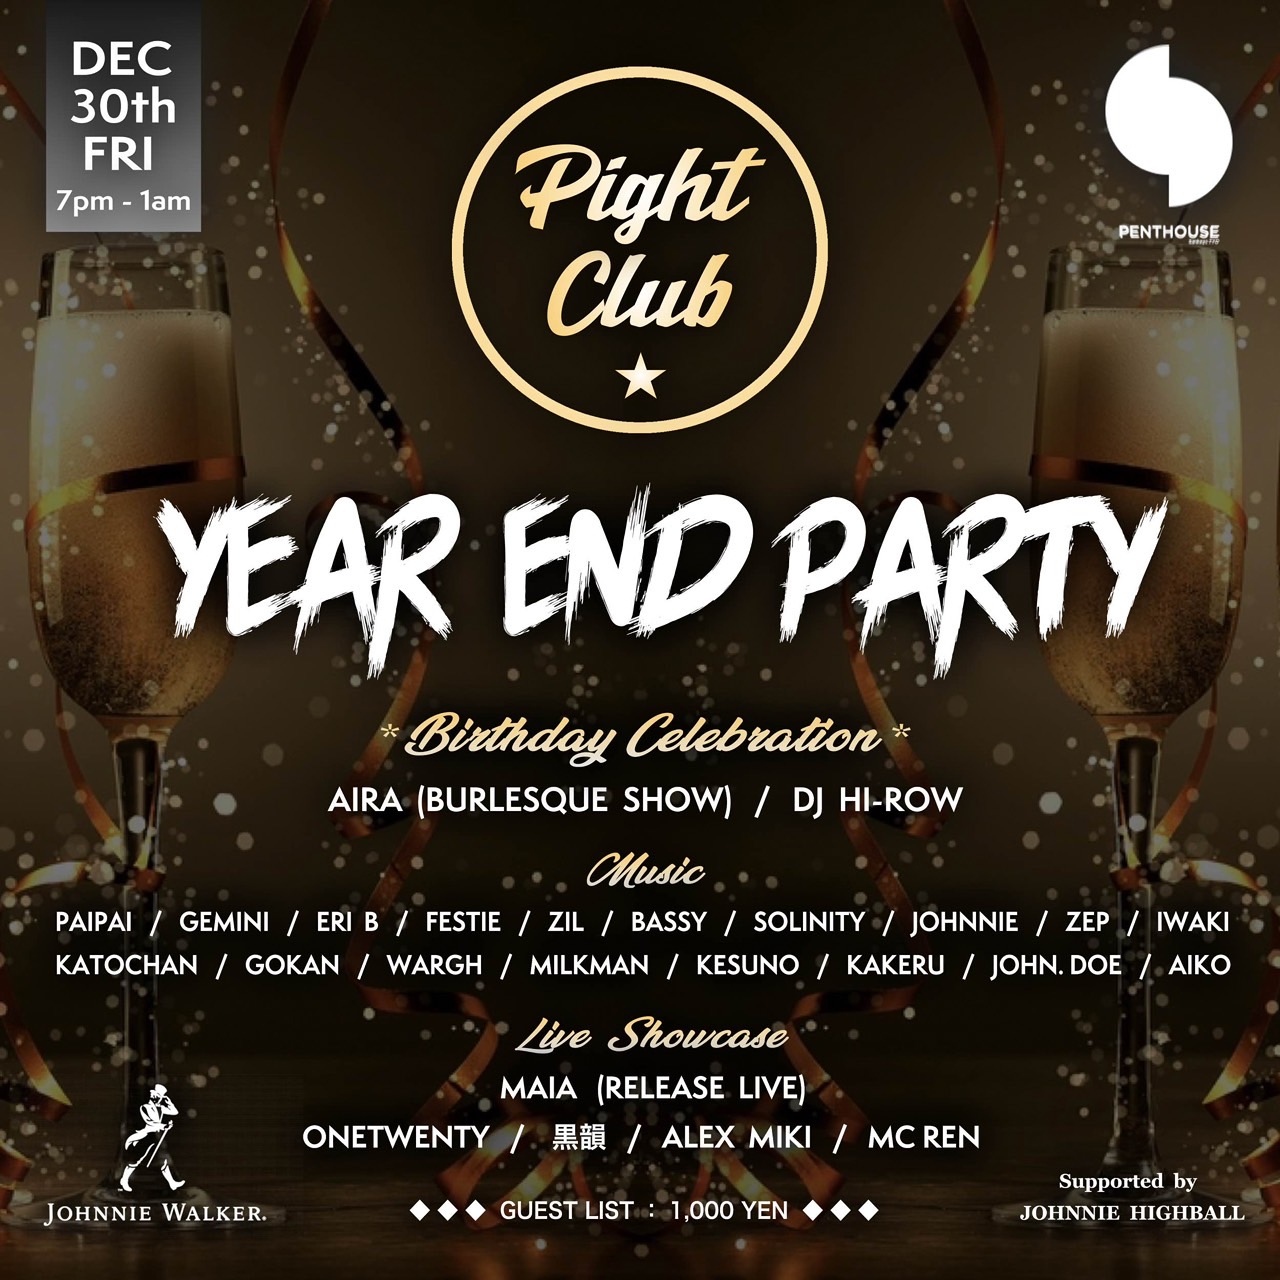 PIGHT CLUB -YEAR END PARTY-